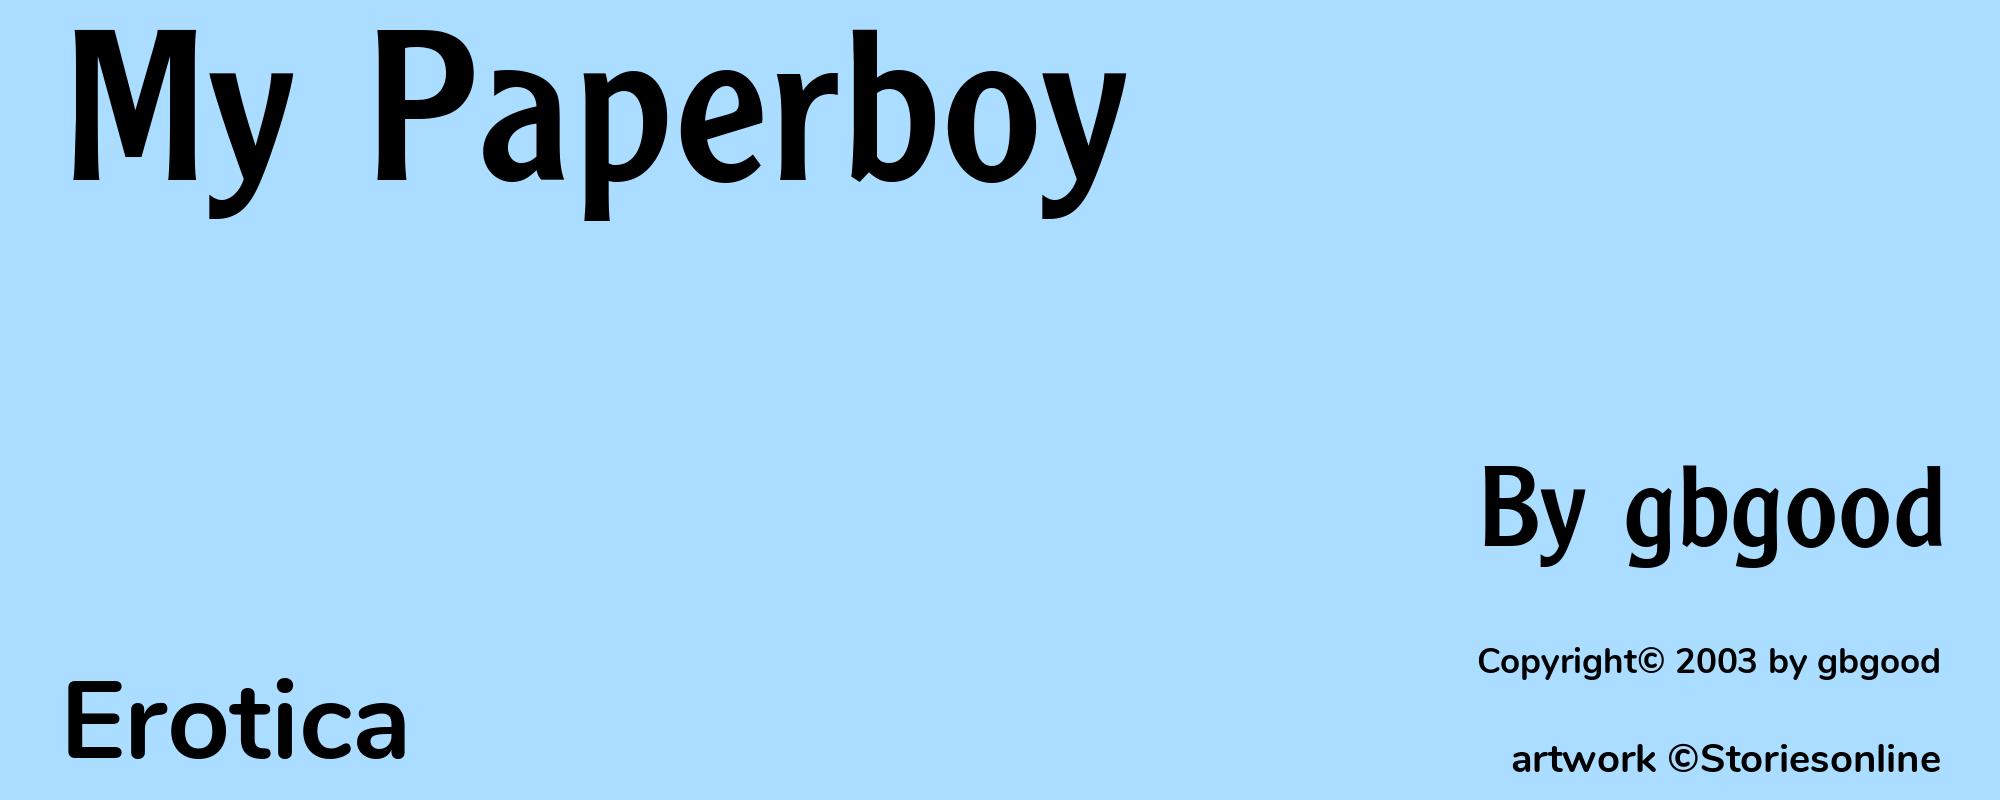 My Paperboy - Cover